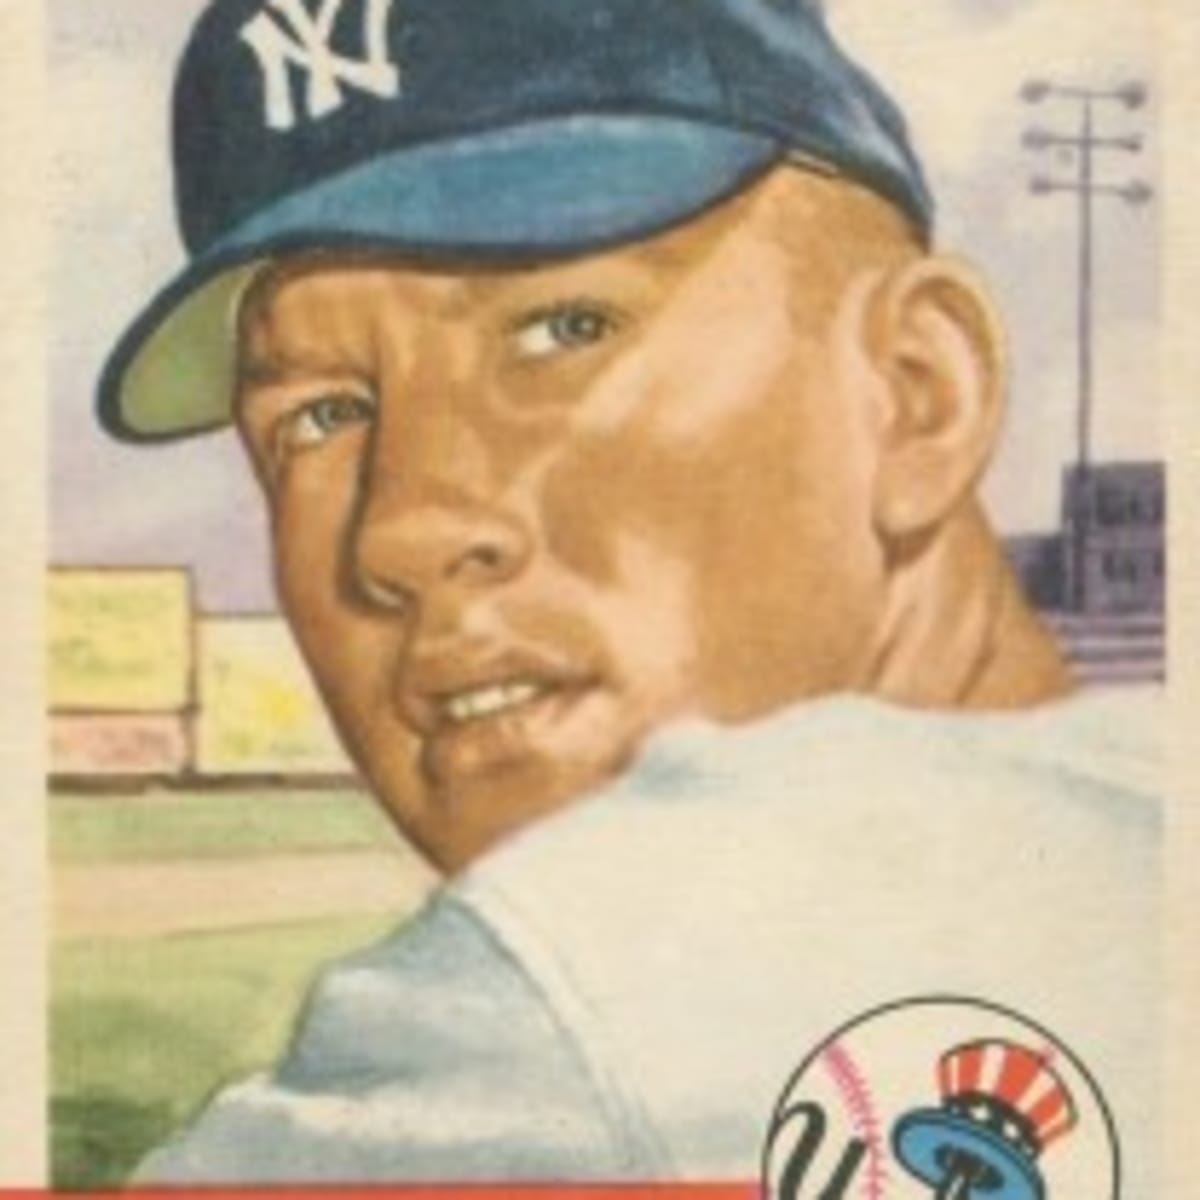 WHEN TOPPS HAD (BASE)BALLS!: A RE-DO OF ONE OF MY OWN: MISSING IN